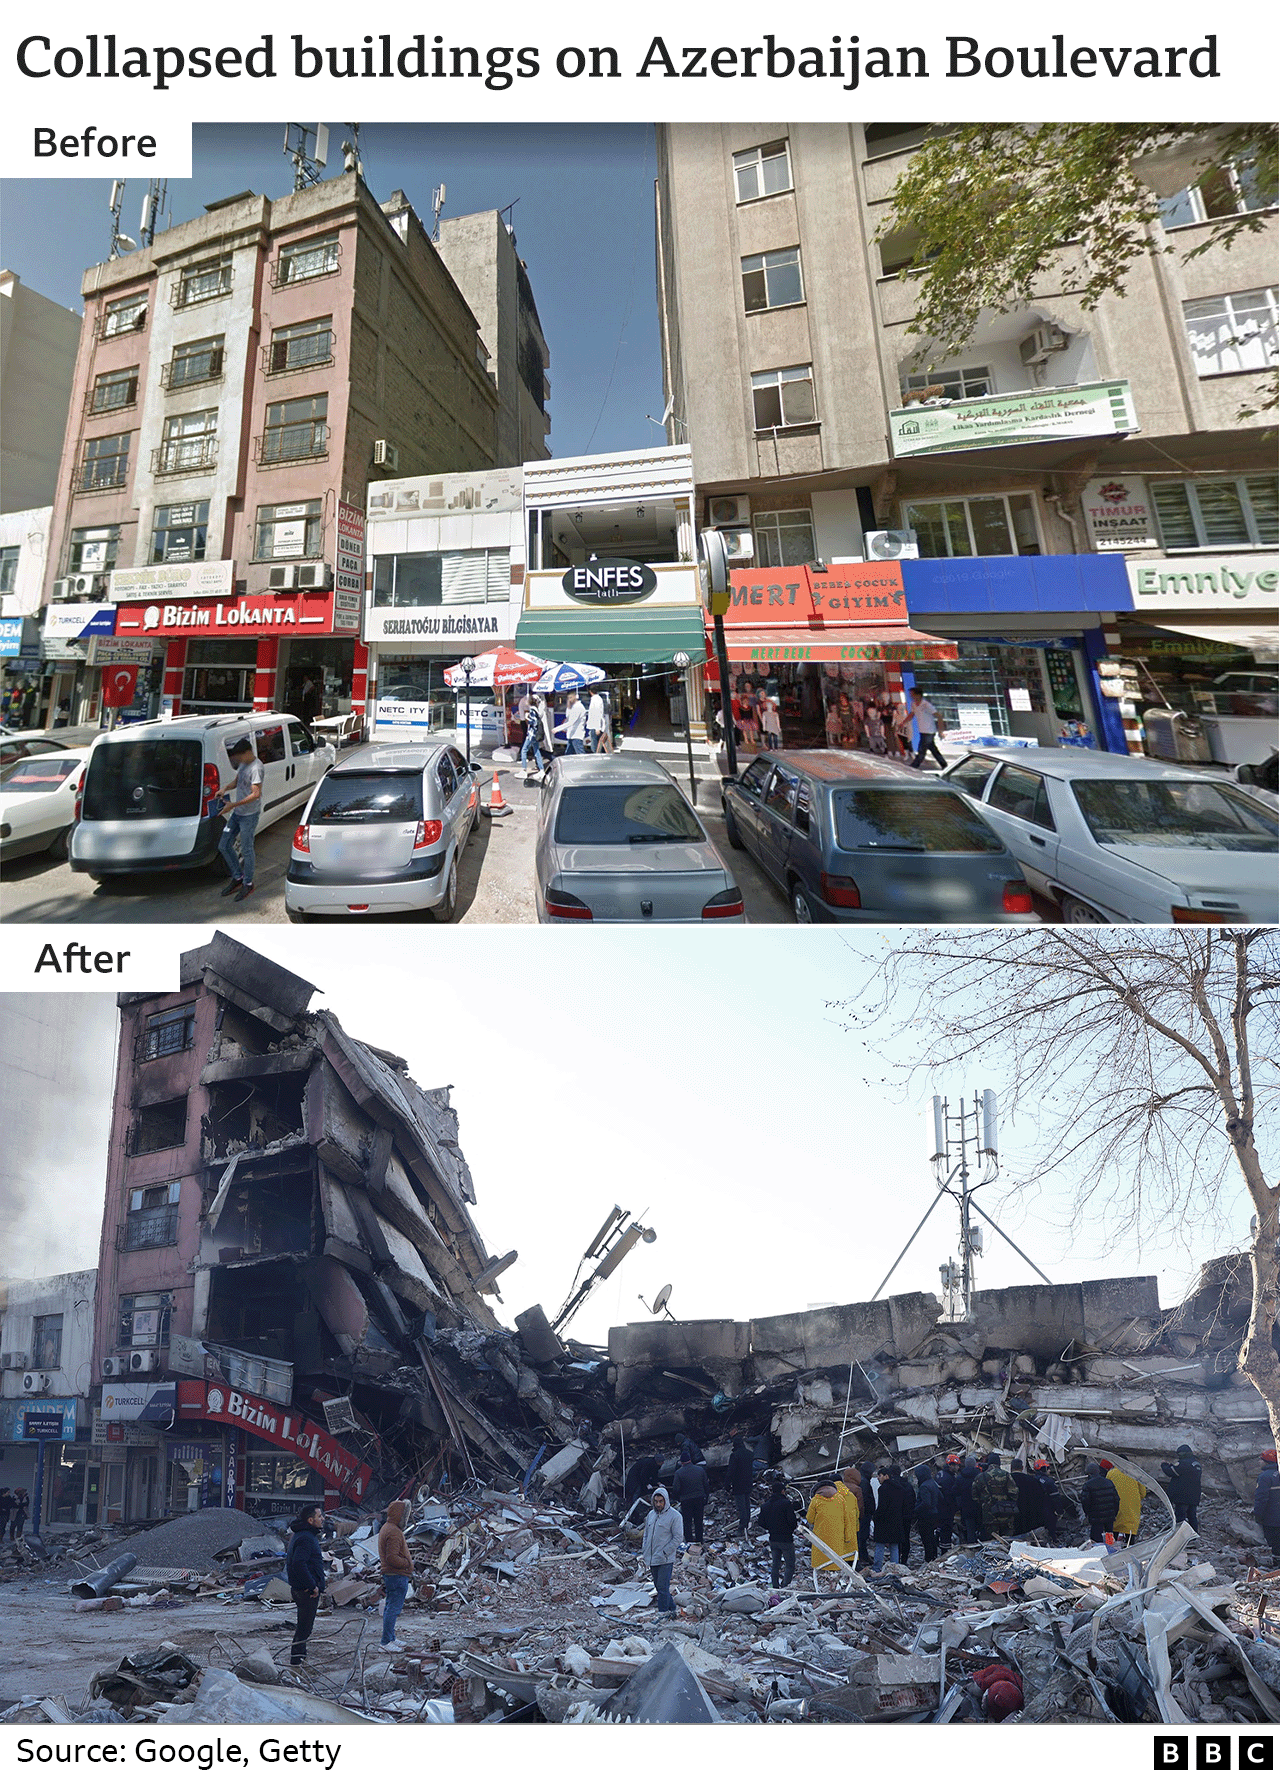 Before and after images showing apartments over shops and cafes in Azerbaijan Boulevard that have been reduced to rubble